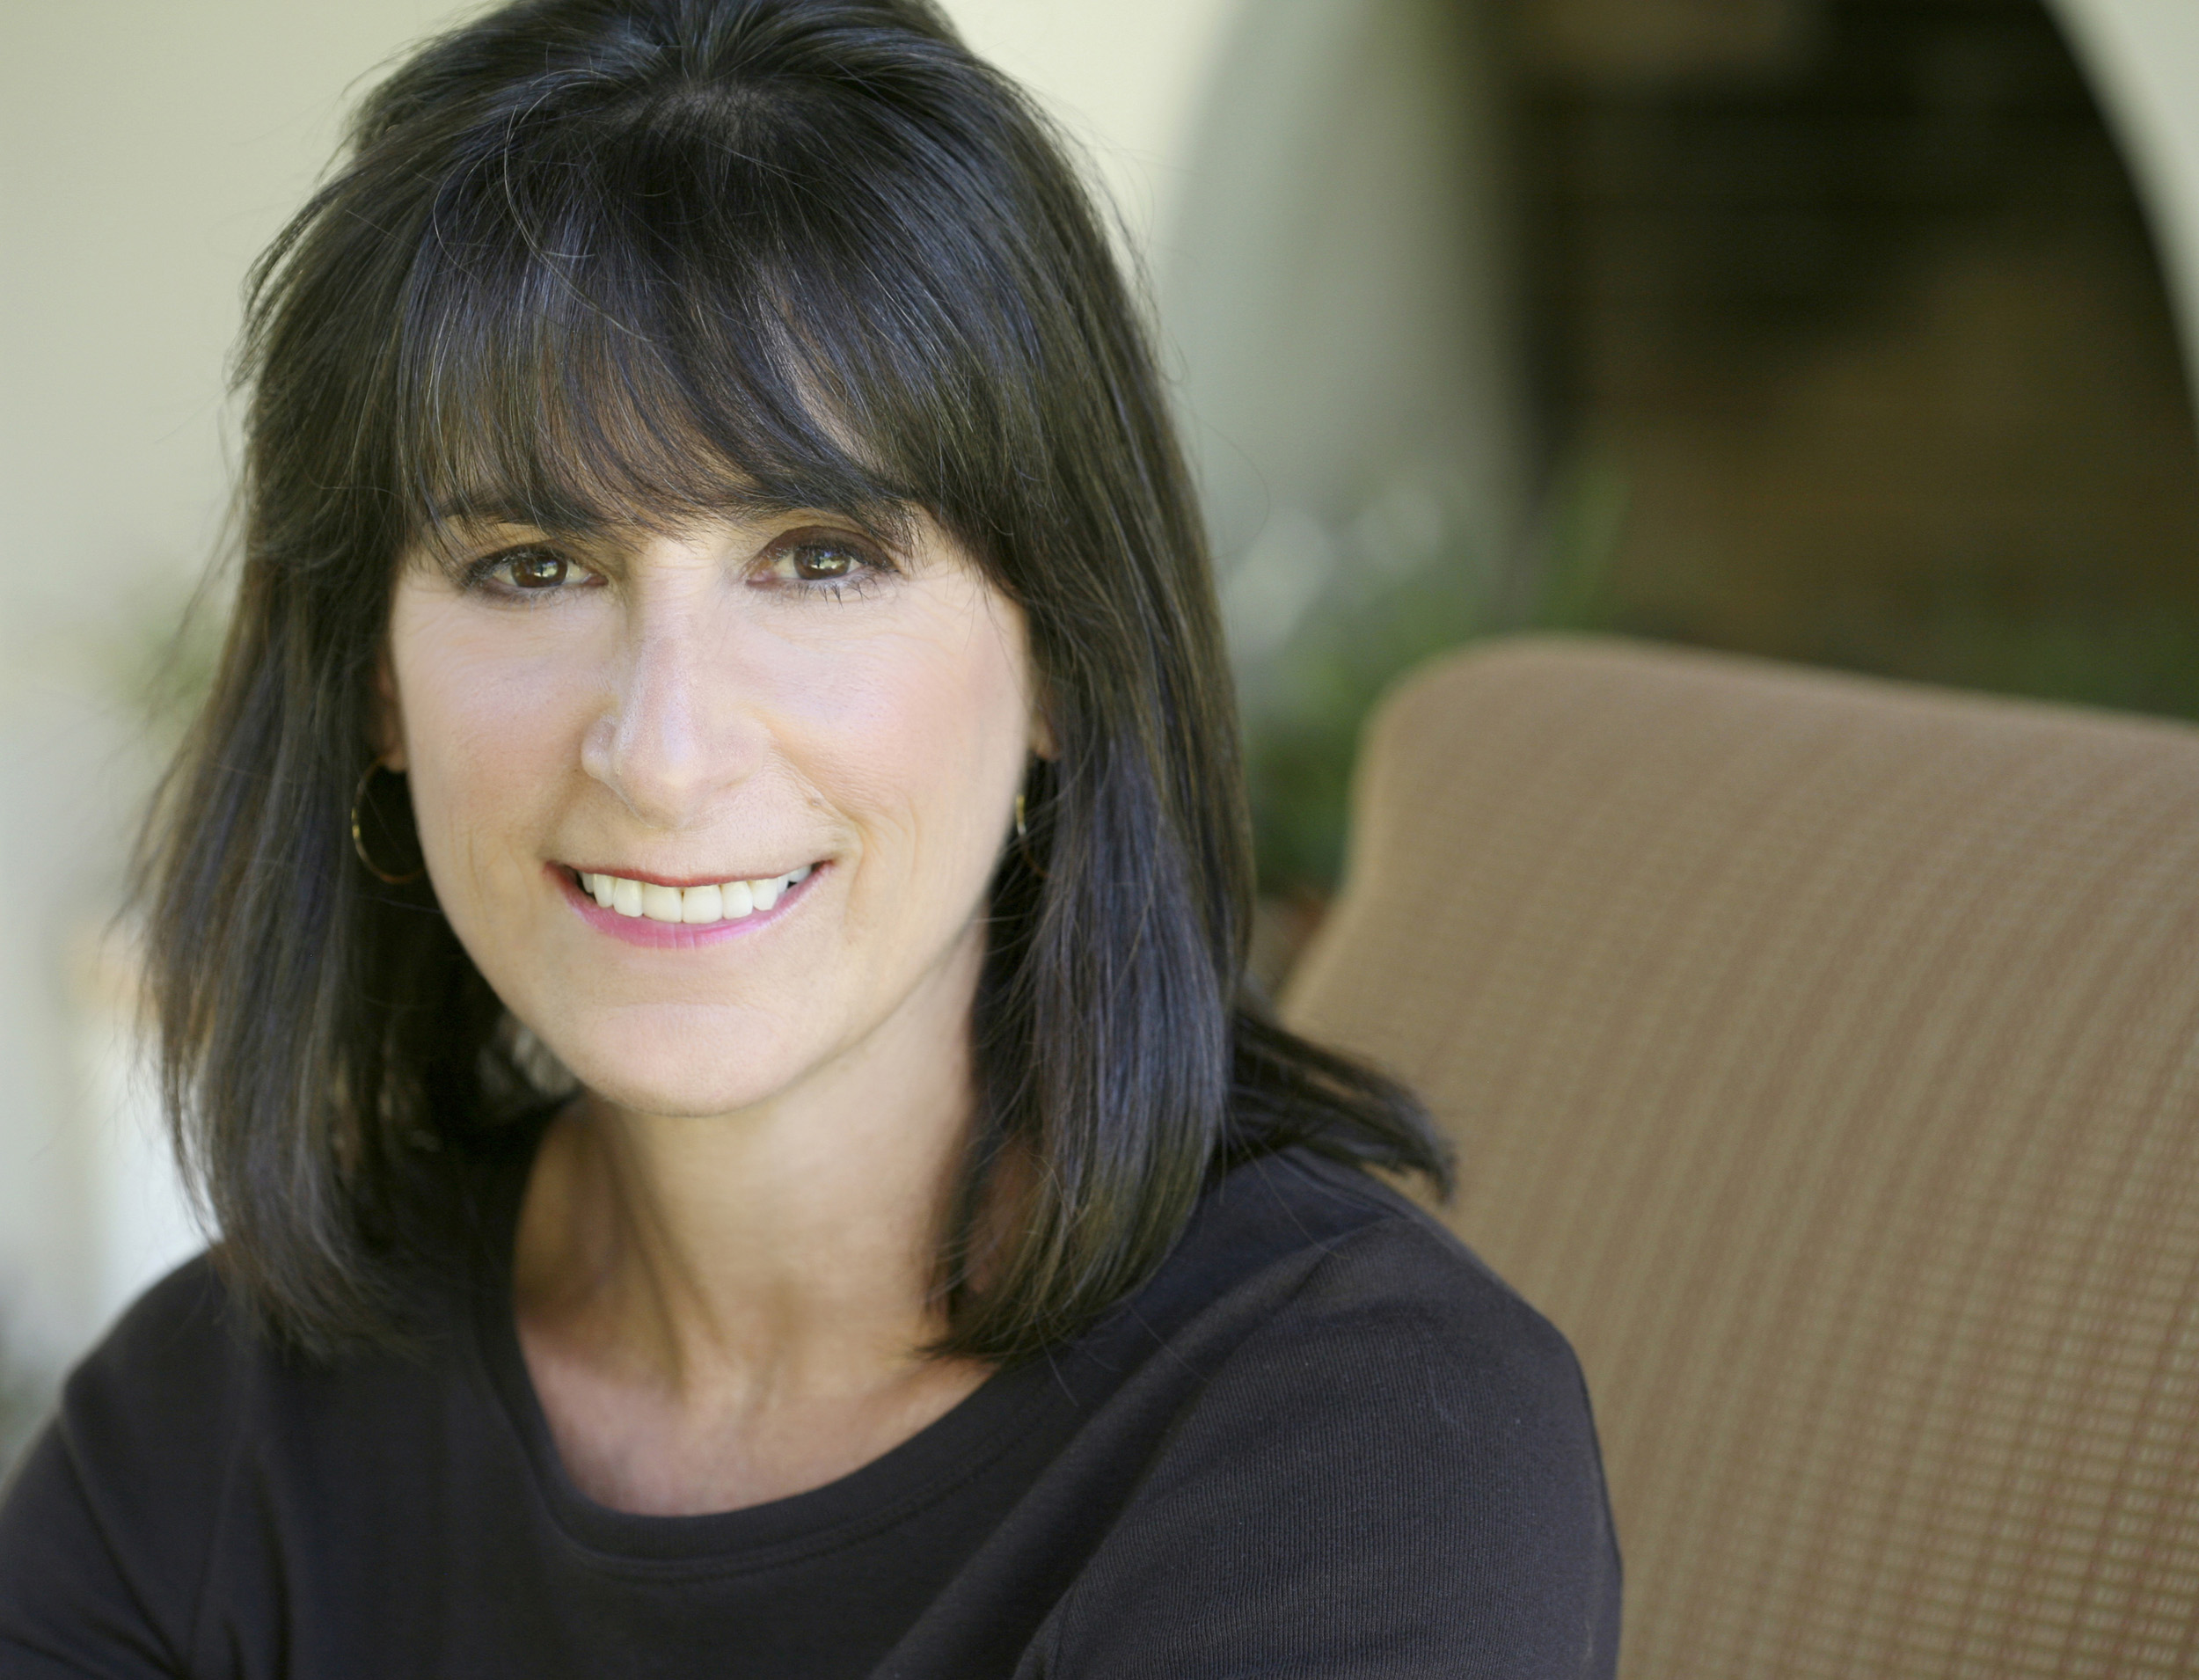 A staple of the 60s and 70s folk circuit, Karla Bonoff has had lyrics have picked up by Bonnie Raitt and Linda Ronstadt, recorded with Peter Frampton and Don Henley and toured with James Taylor, John Prine and Jackson Browne. The music she and others from the Troubadour scene made has left a permanent imprint.